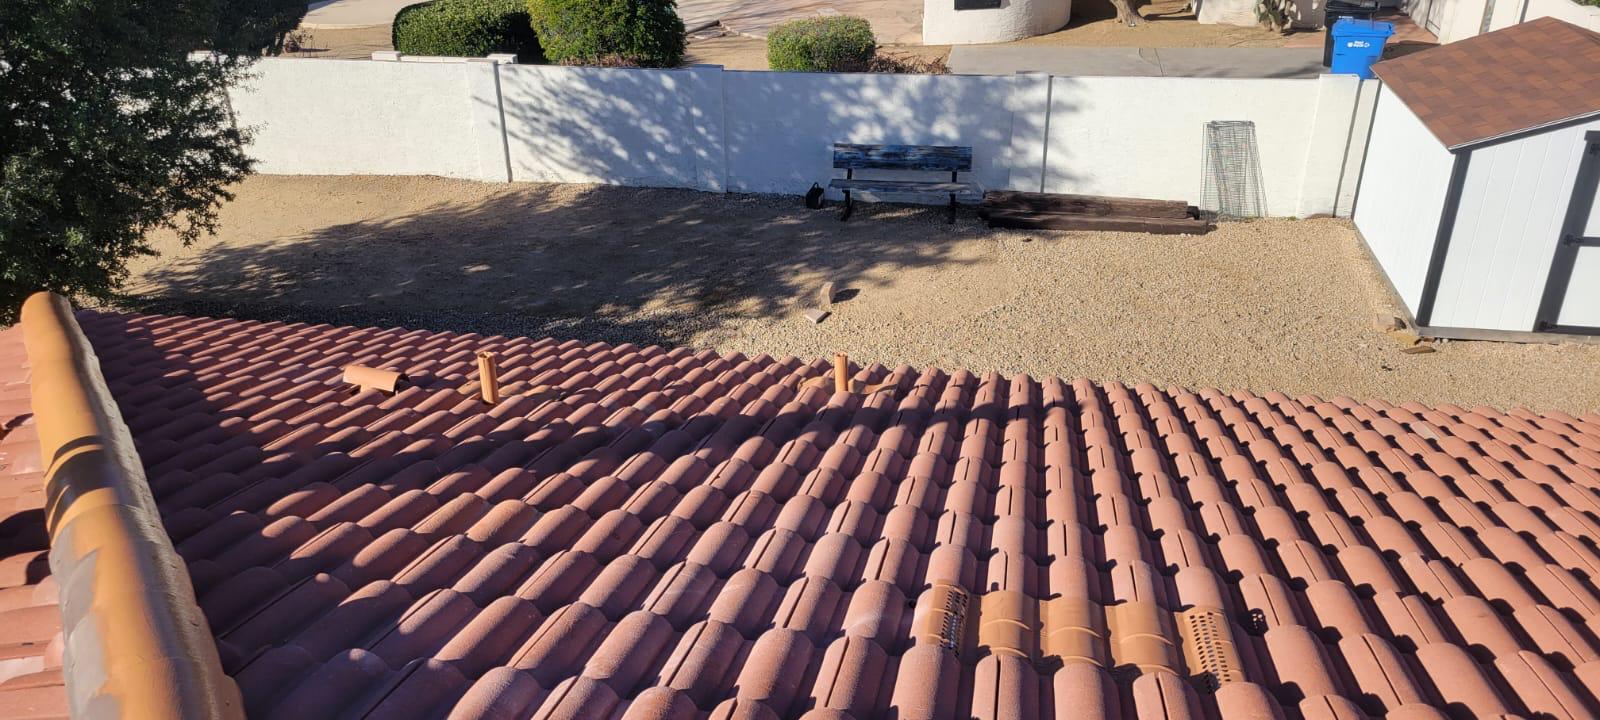 Precision re-felting of a tile roof in Scottsdale.